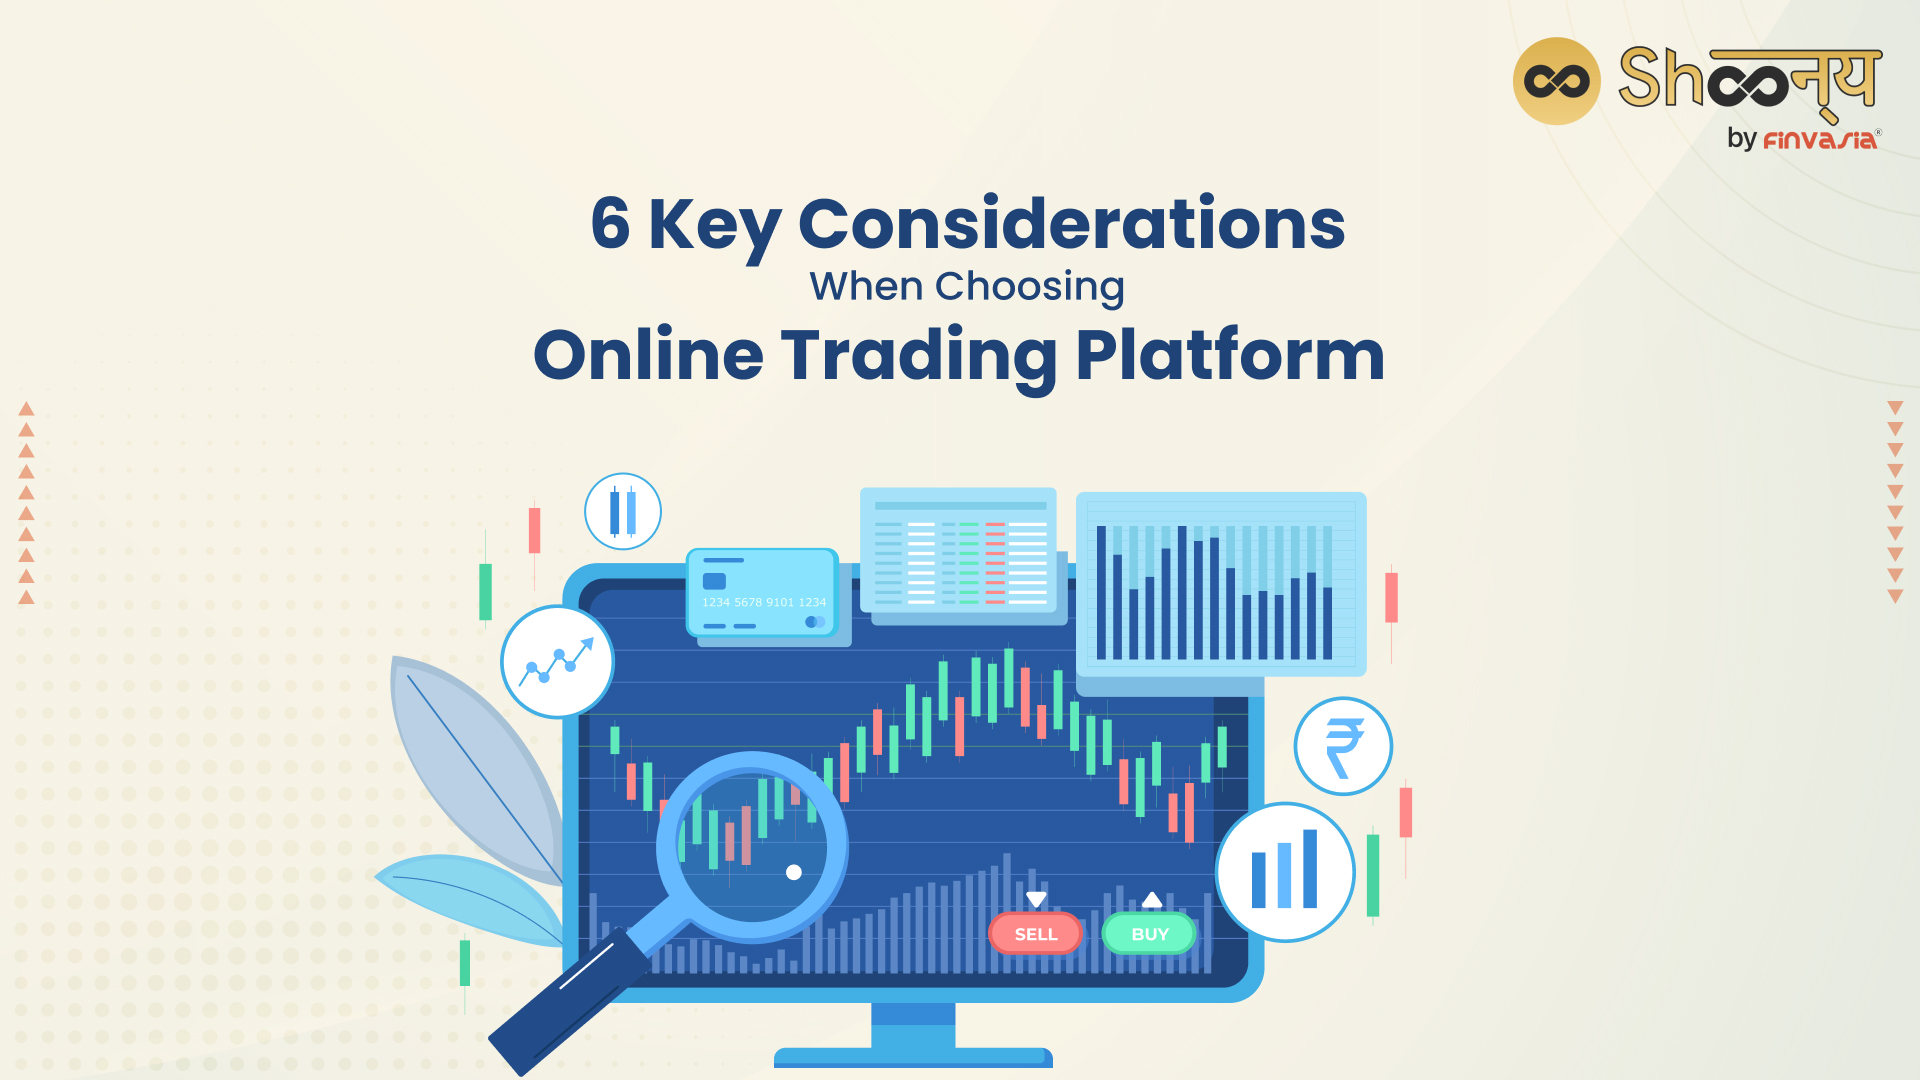 Essential Features for Choosing Your Online Trading Platform